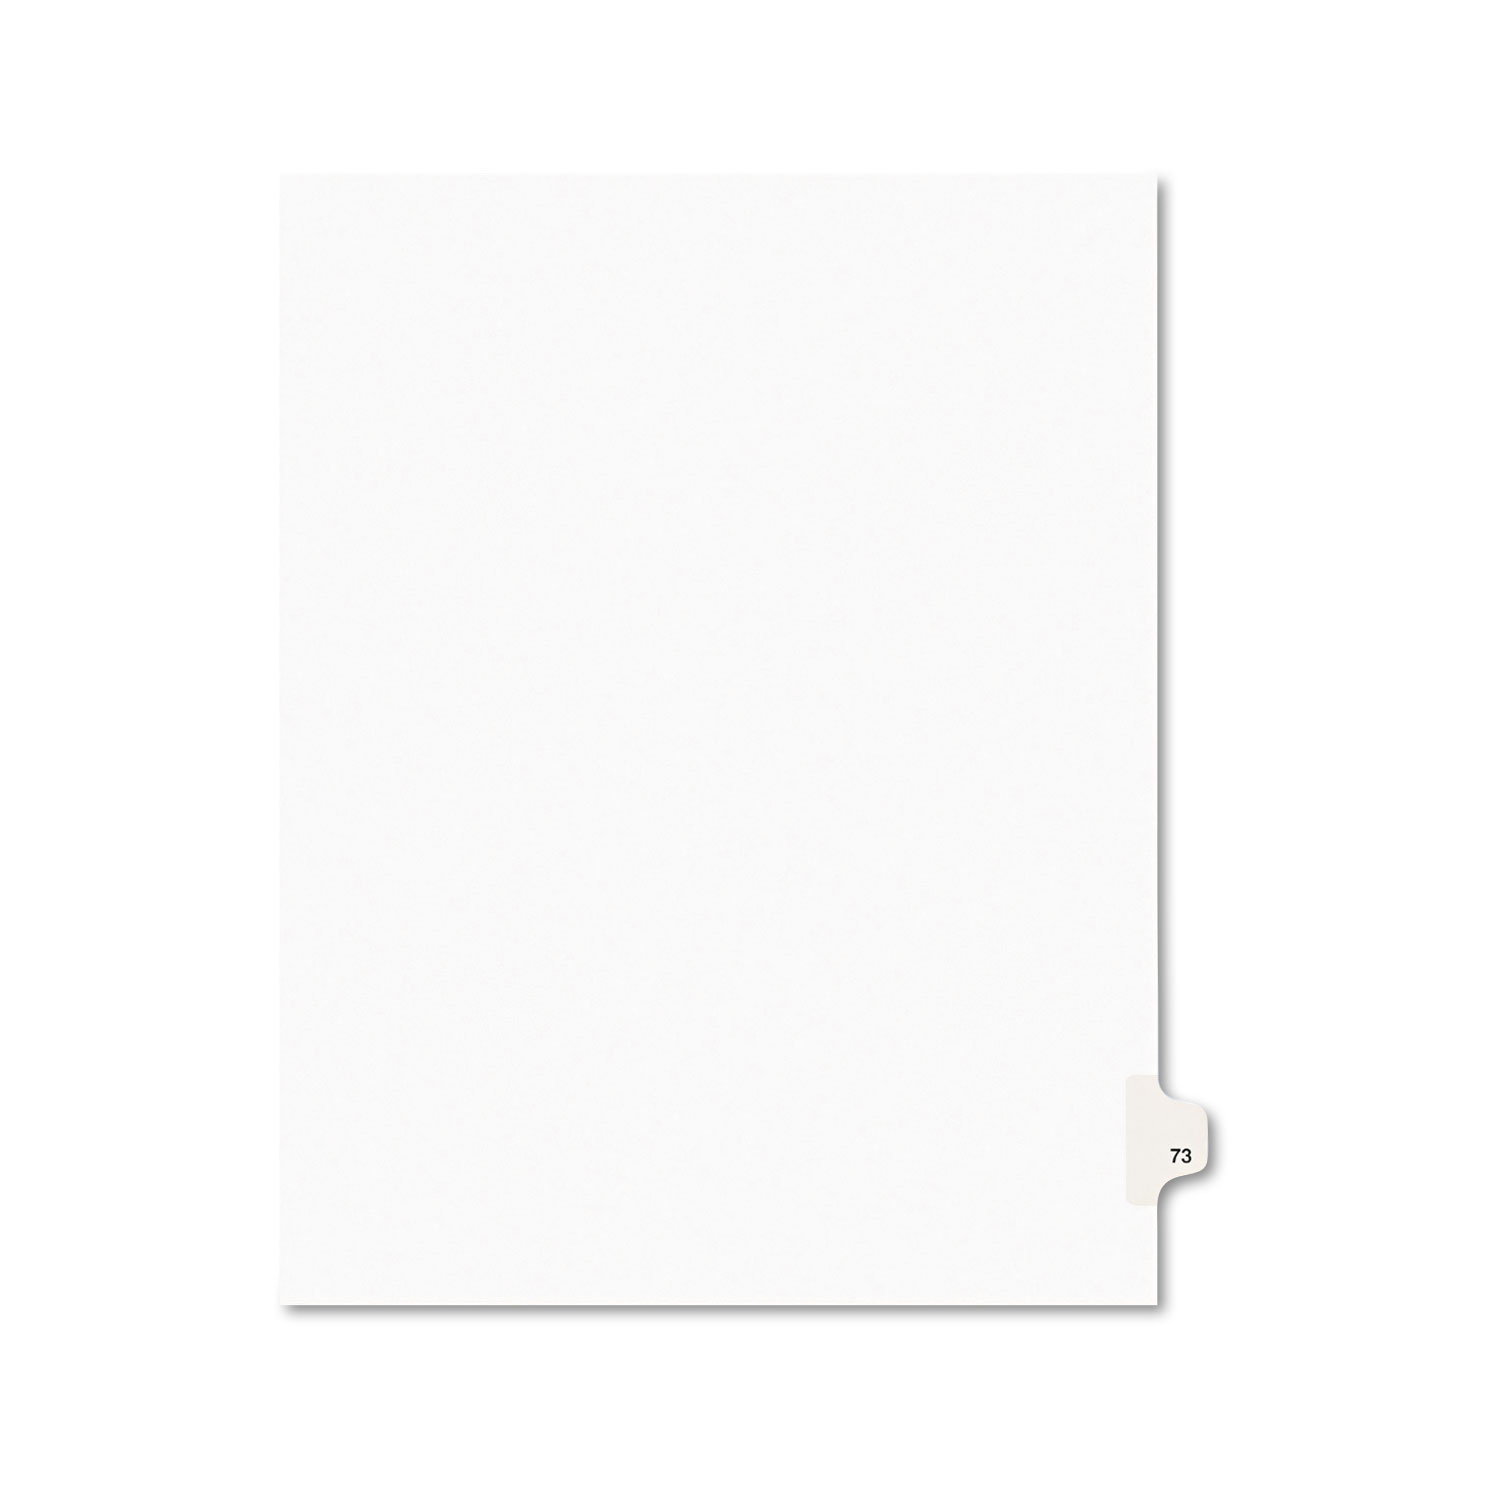  Avery 01073 Preprinted Legal Exhibit Side Tab Index Dividers, Avery Style, 10-Tab, 73, 11 x 8.5, White, 25/Pack (AVE01073) 